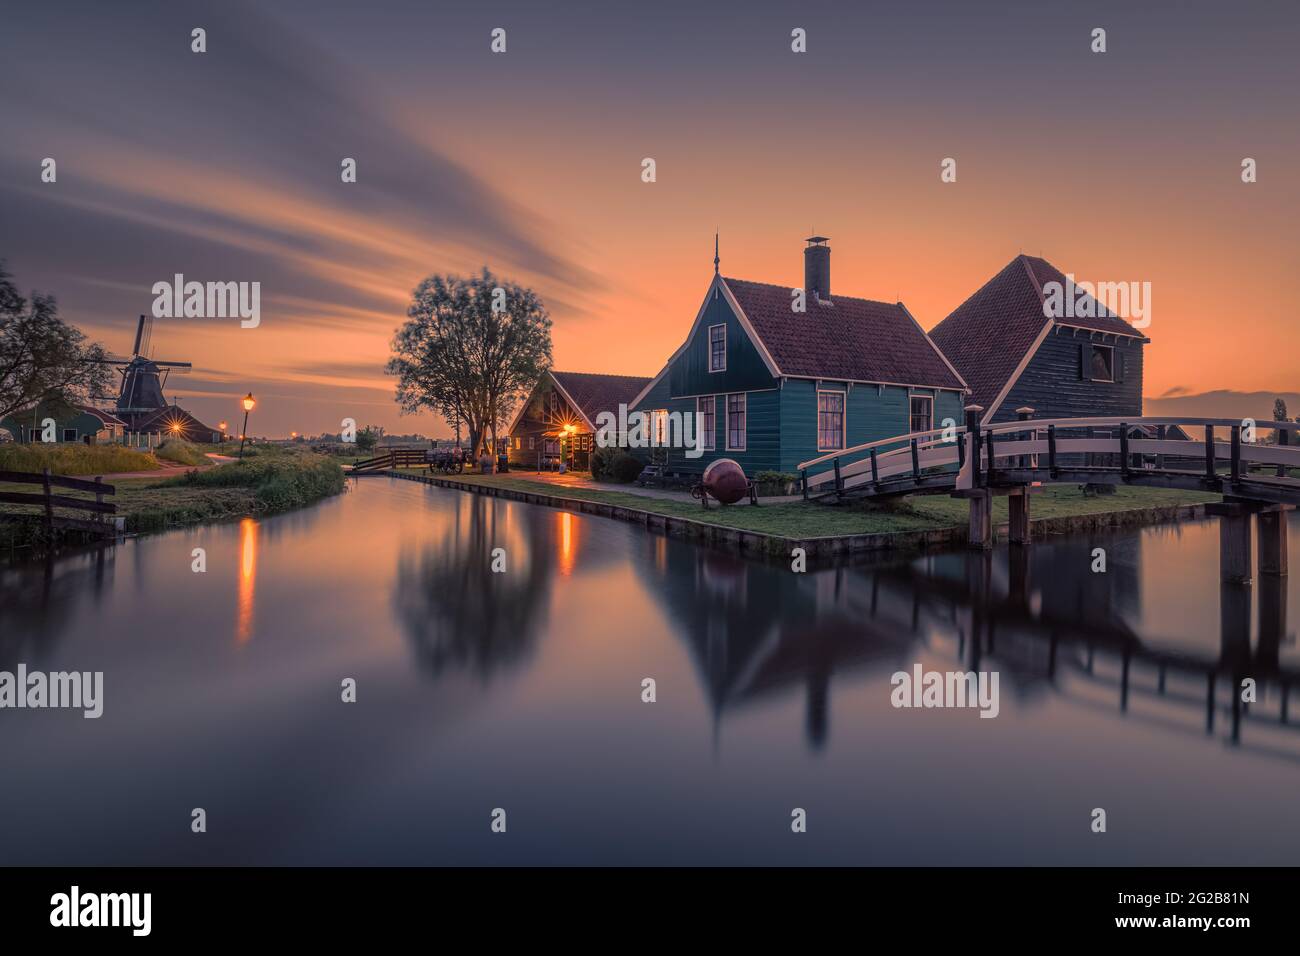 Sunrise at the Zaanse Schans, a well known touristic hotspot in Zaandijk, in the Dutch province of Noord-Holland, not far from Amsterdam. Stock Photo